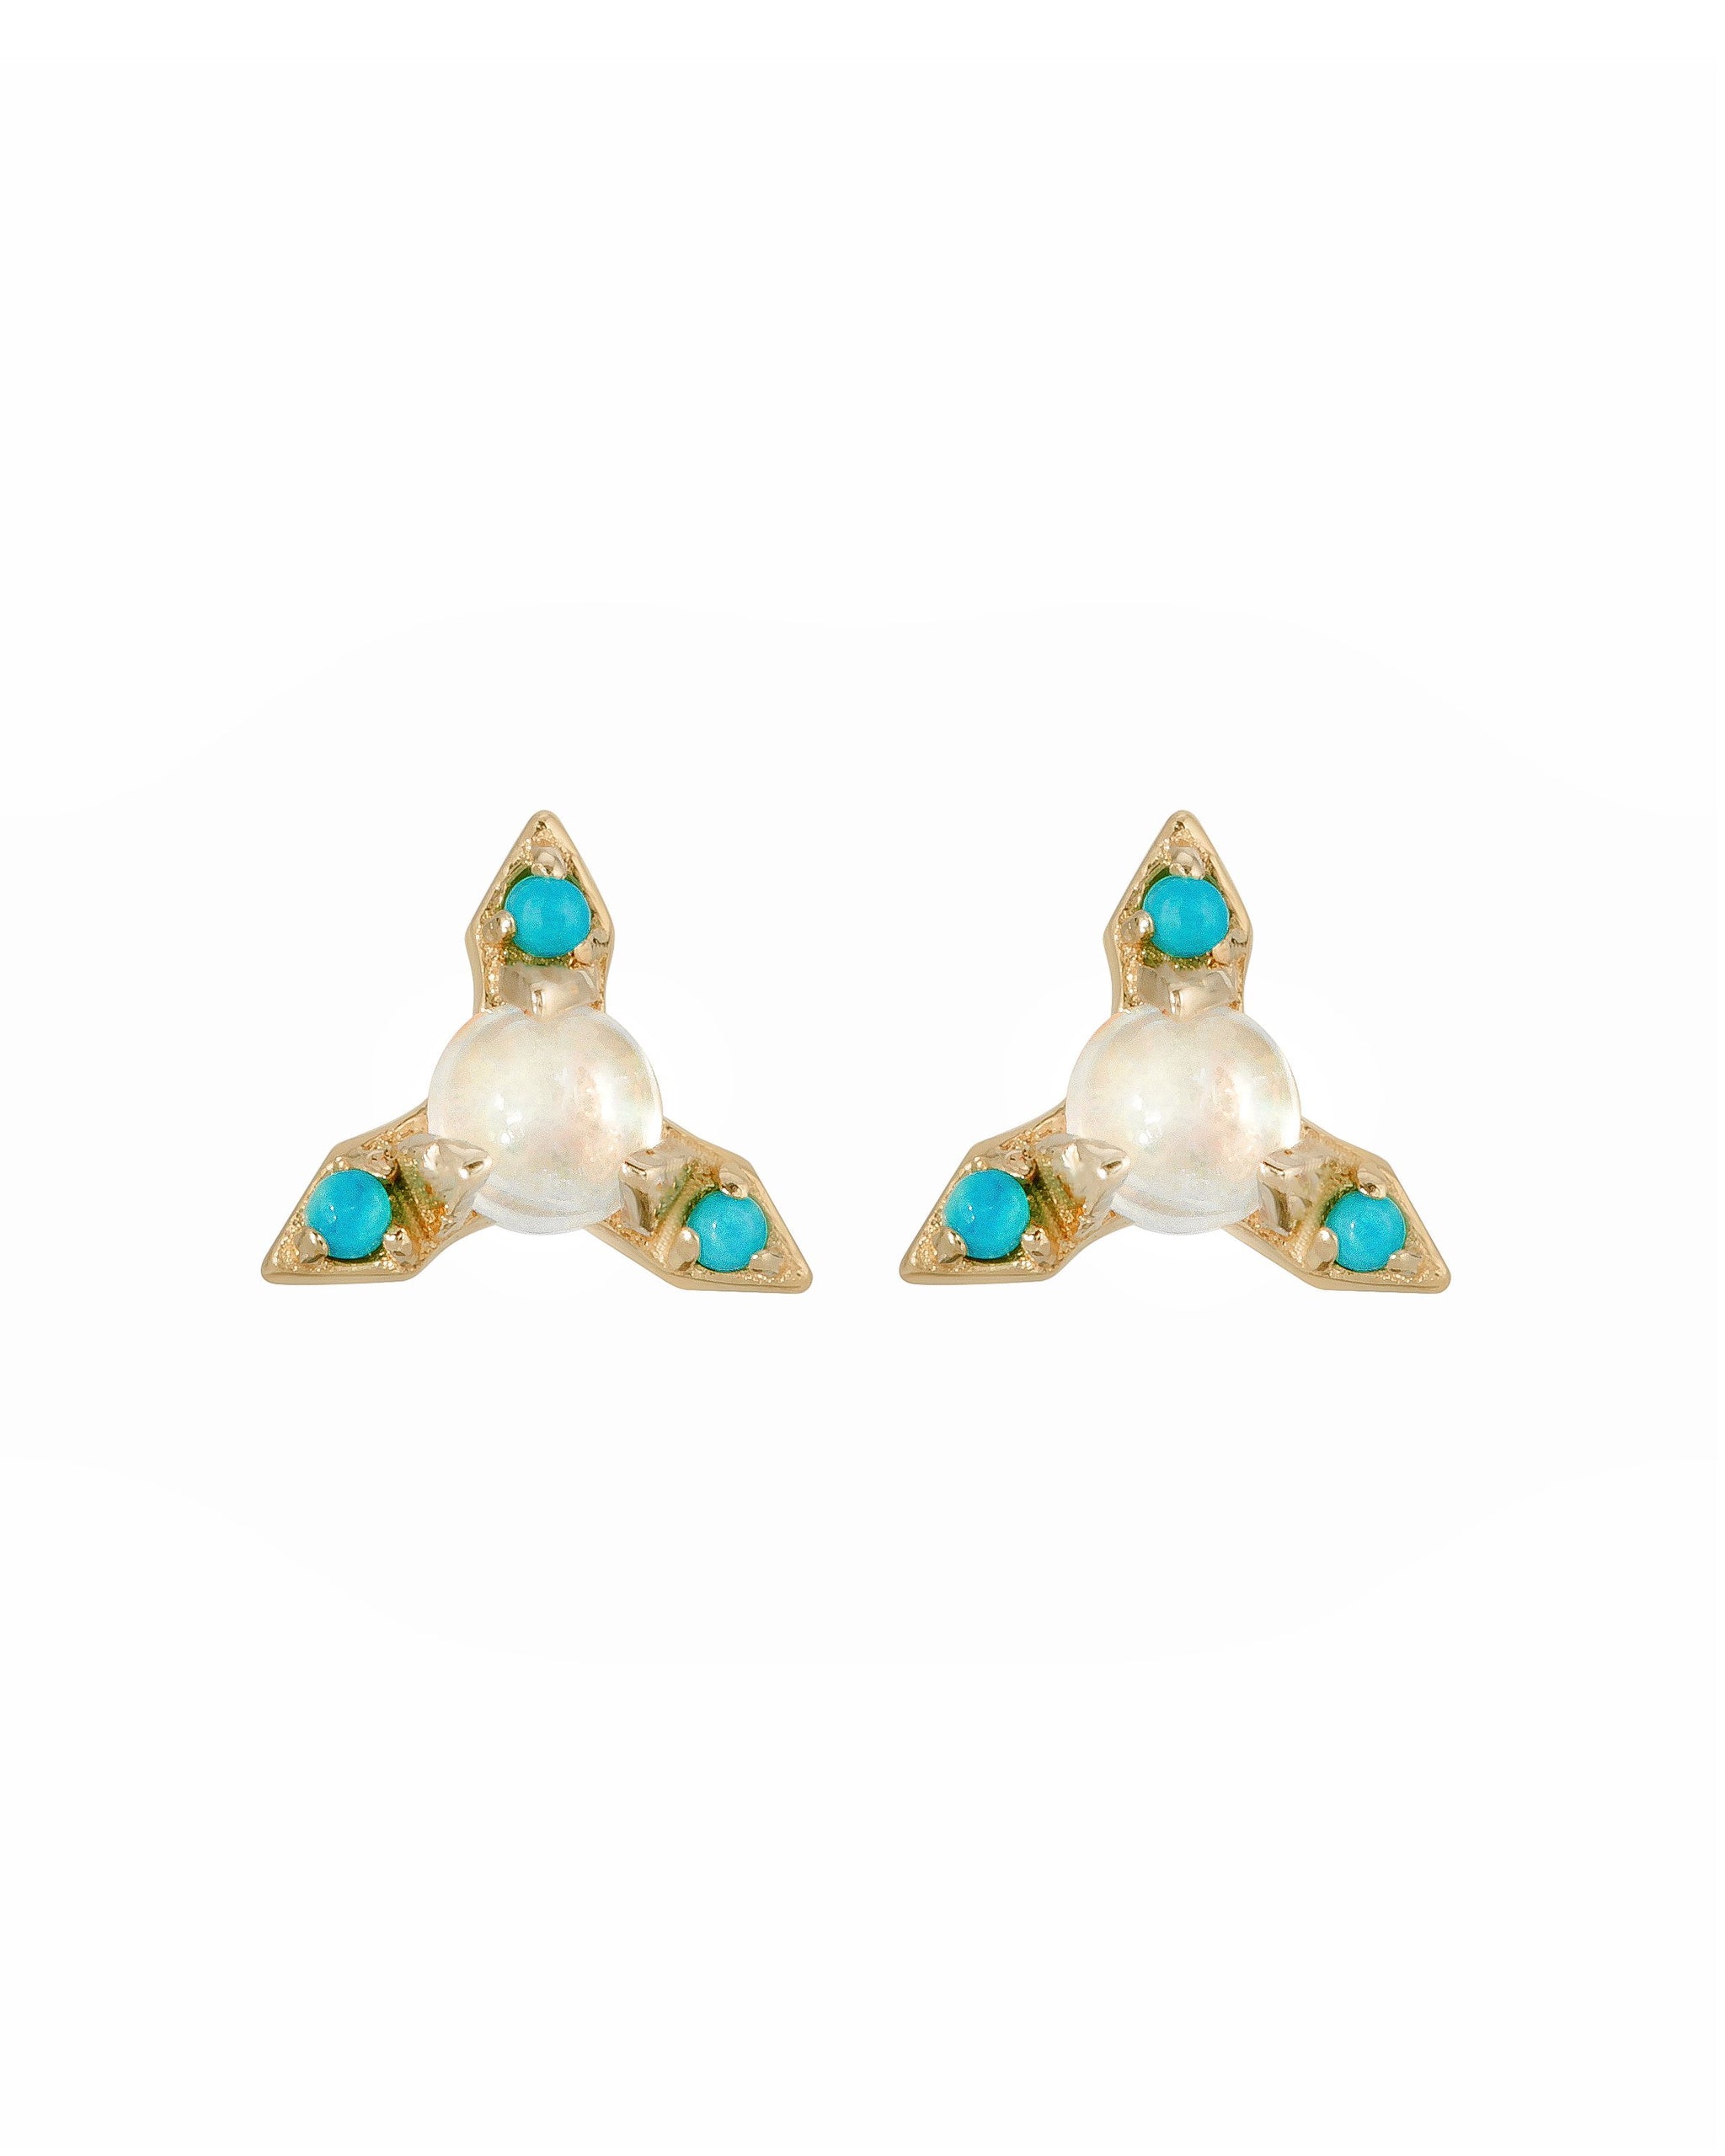 Nova Studs, 14k Yellow Gold, One 3mm Moonstone surrounded by three 1mm Sleeping Beauty Turquoise Stones, Handmade by Turquoise + Tobacco